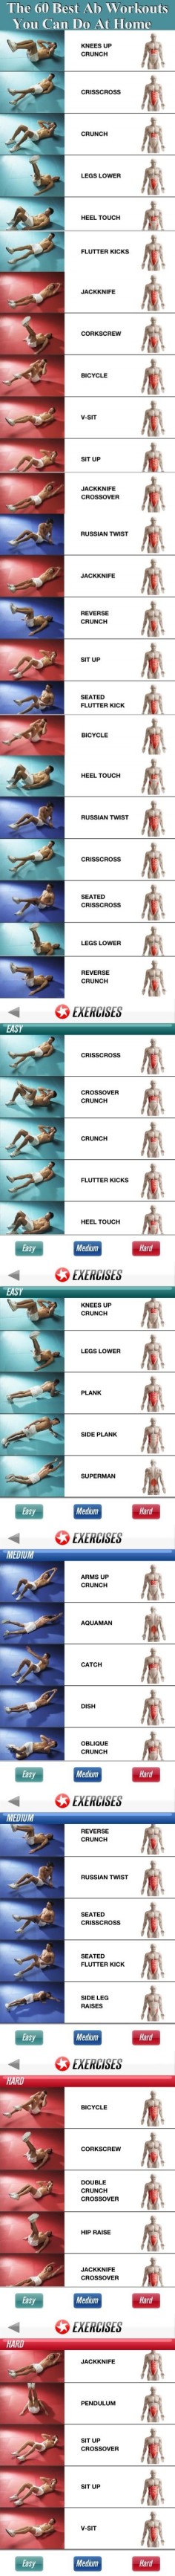 The 60 Best Ab Workouts You Can Do From Home Pictures, Photos, and Images for Facebook, Tumblr, Pinterest, and Twitter